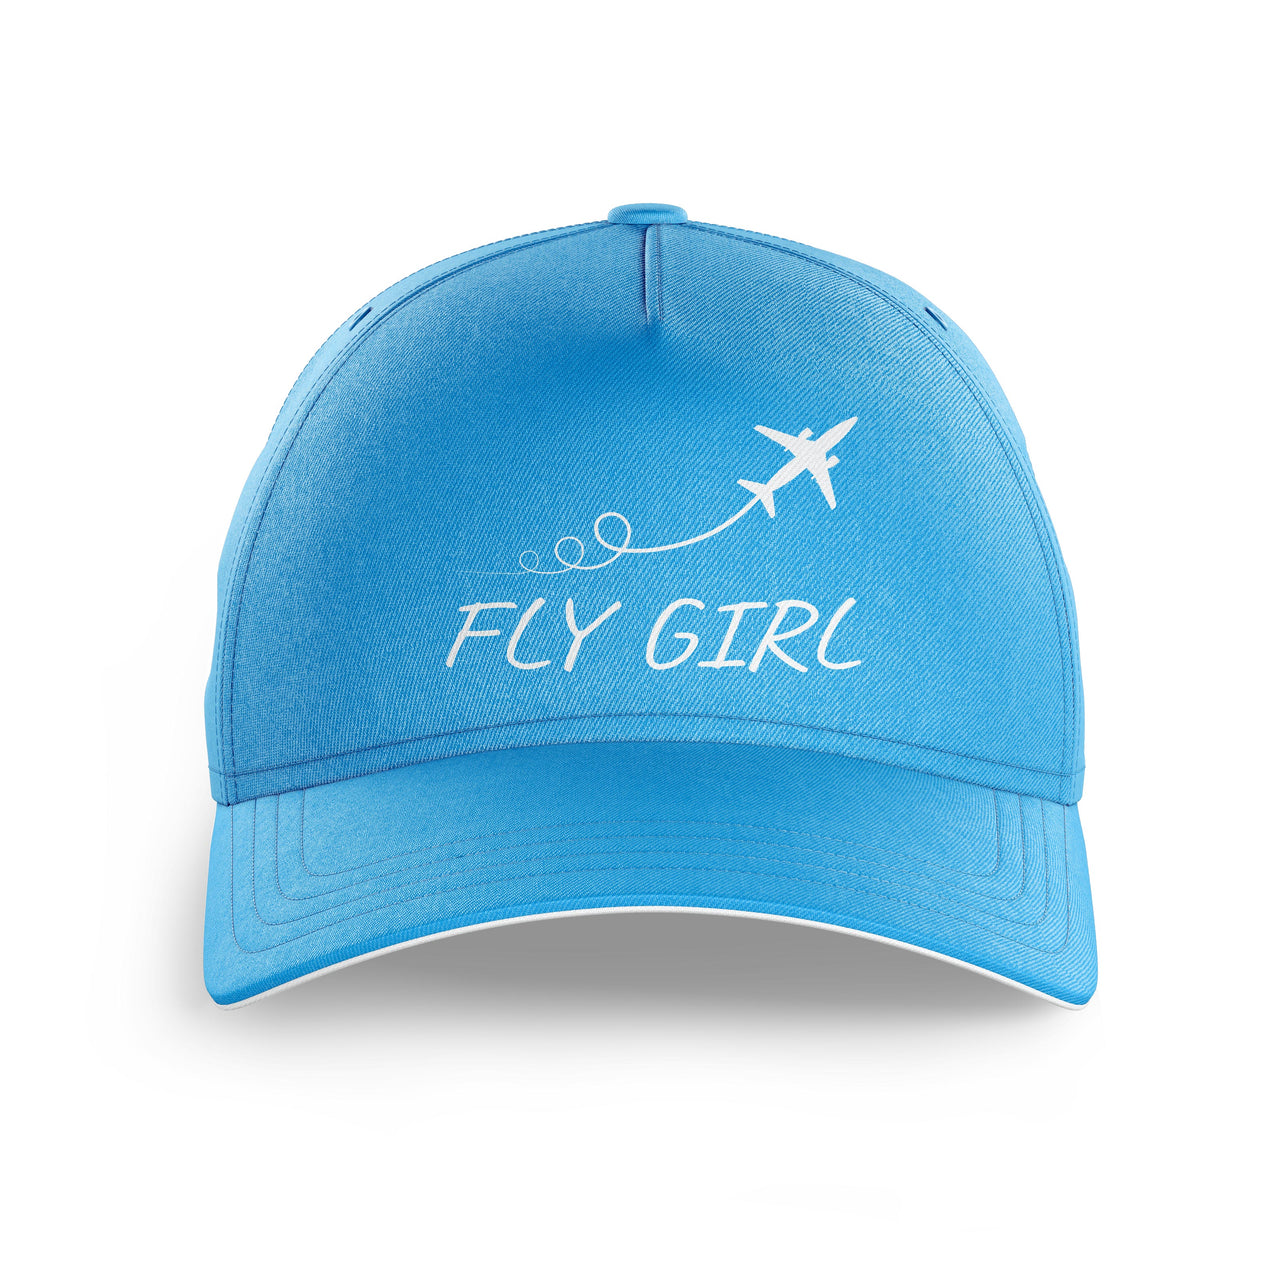 Just Fly It & Fly Girl Printed Hats